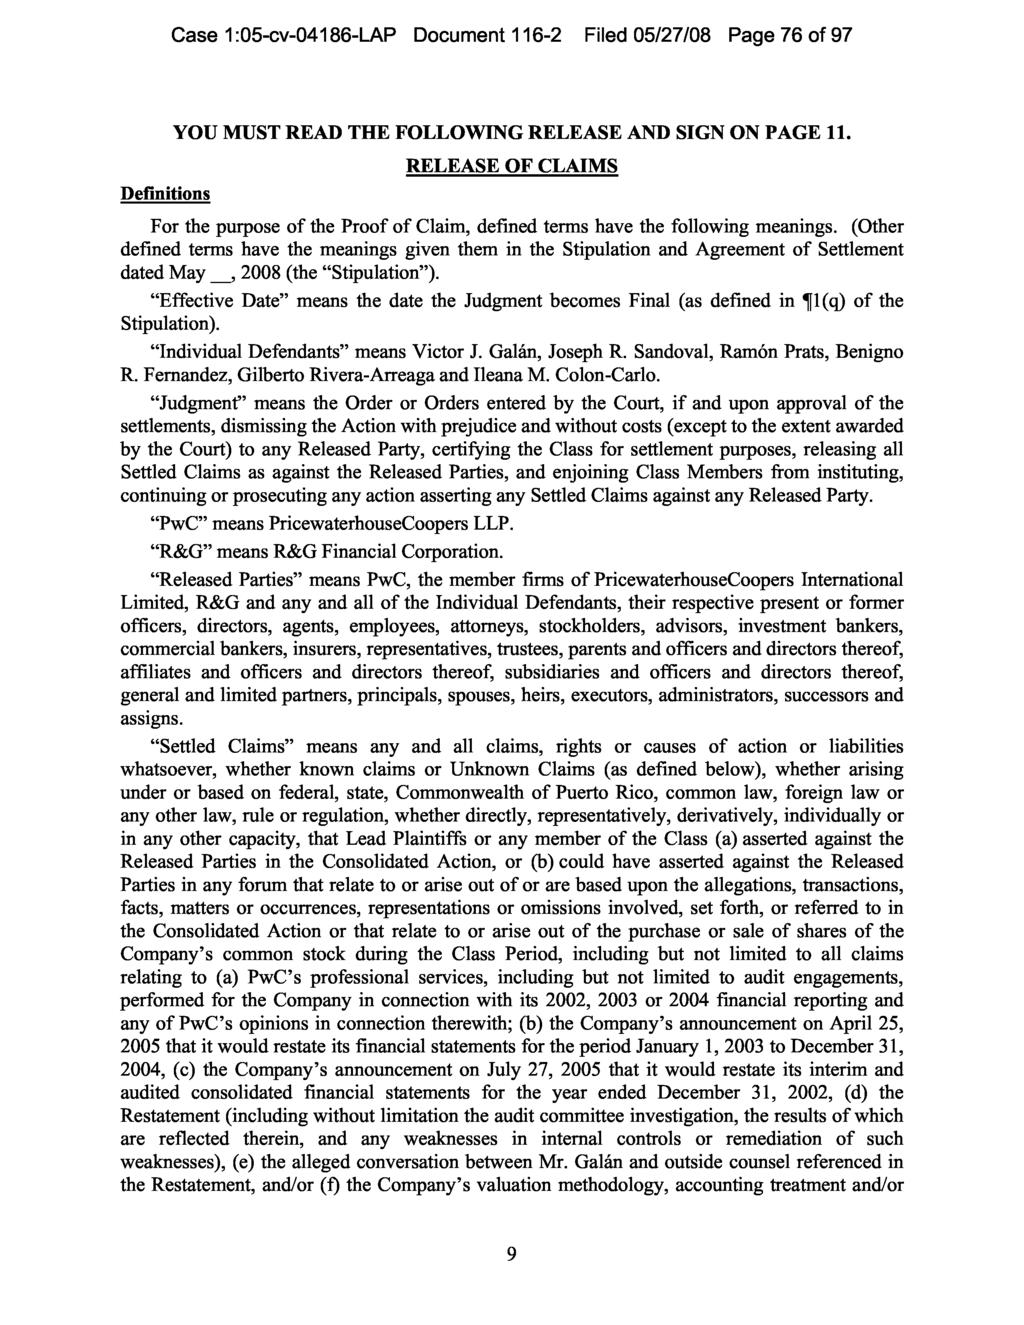 Case 1:05-cv-04186-LAP Document 116-2 Filed 05/27/08 Page 76 of 97 Definitions YOU MUST READ THE FOLLOWING RELEASE AND SIGN ON PAGE 11.